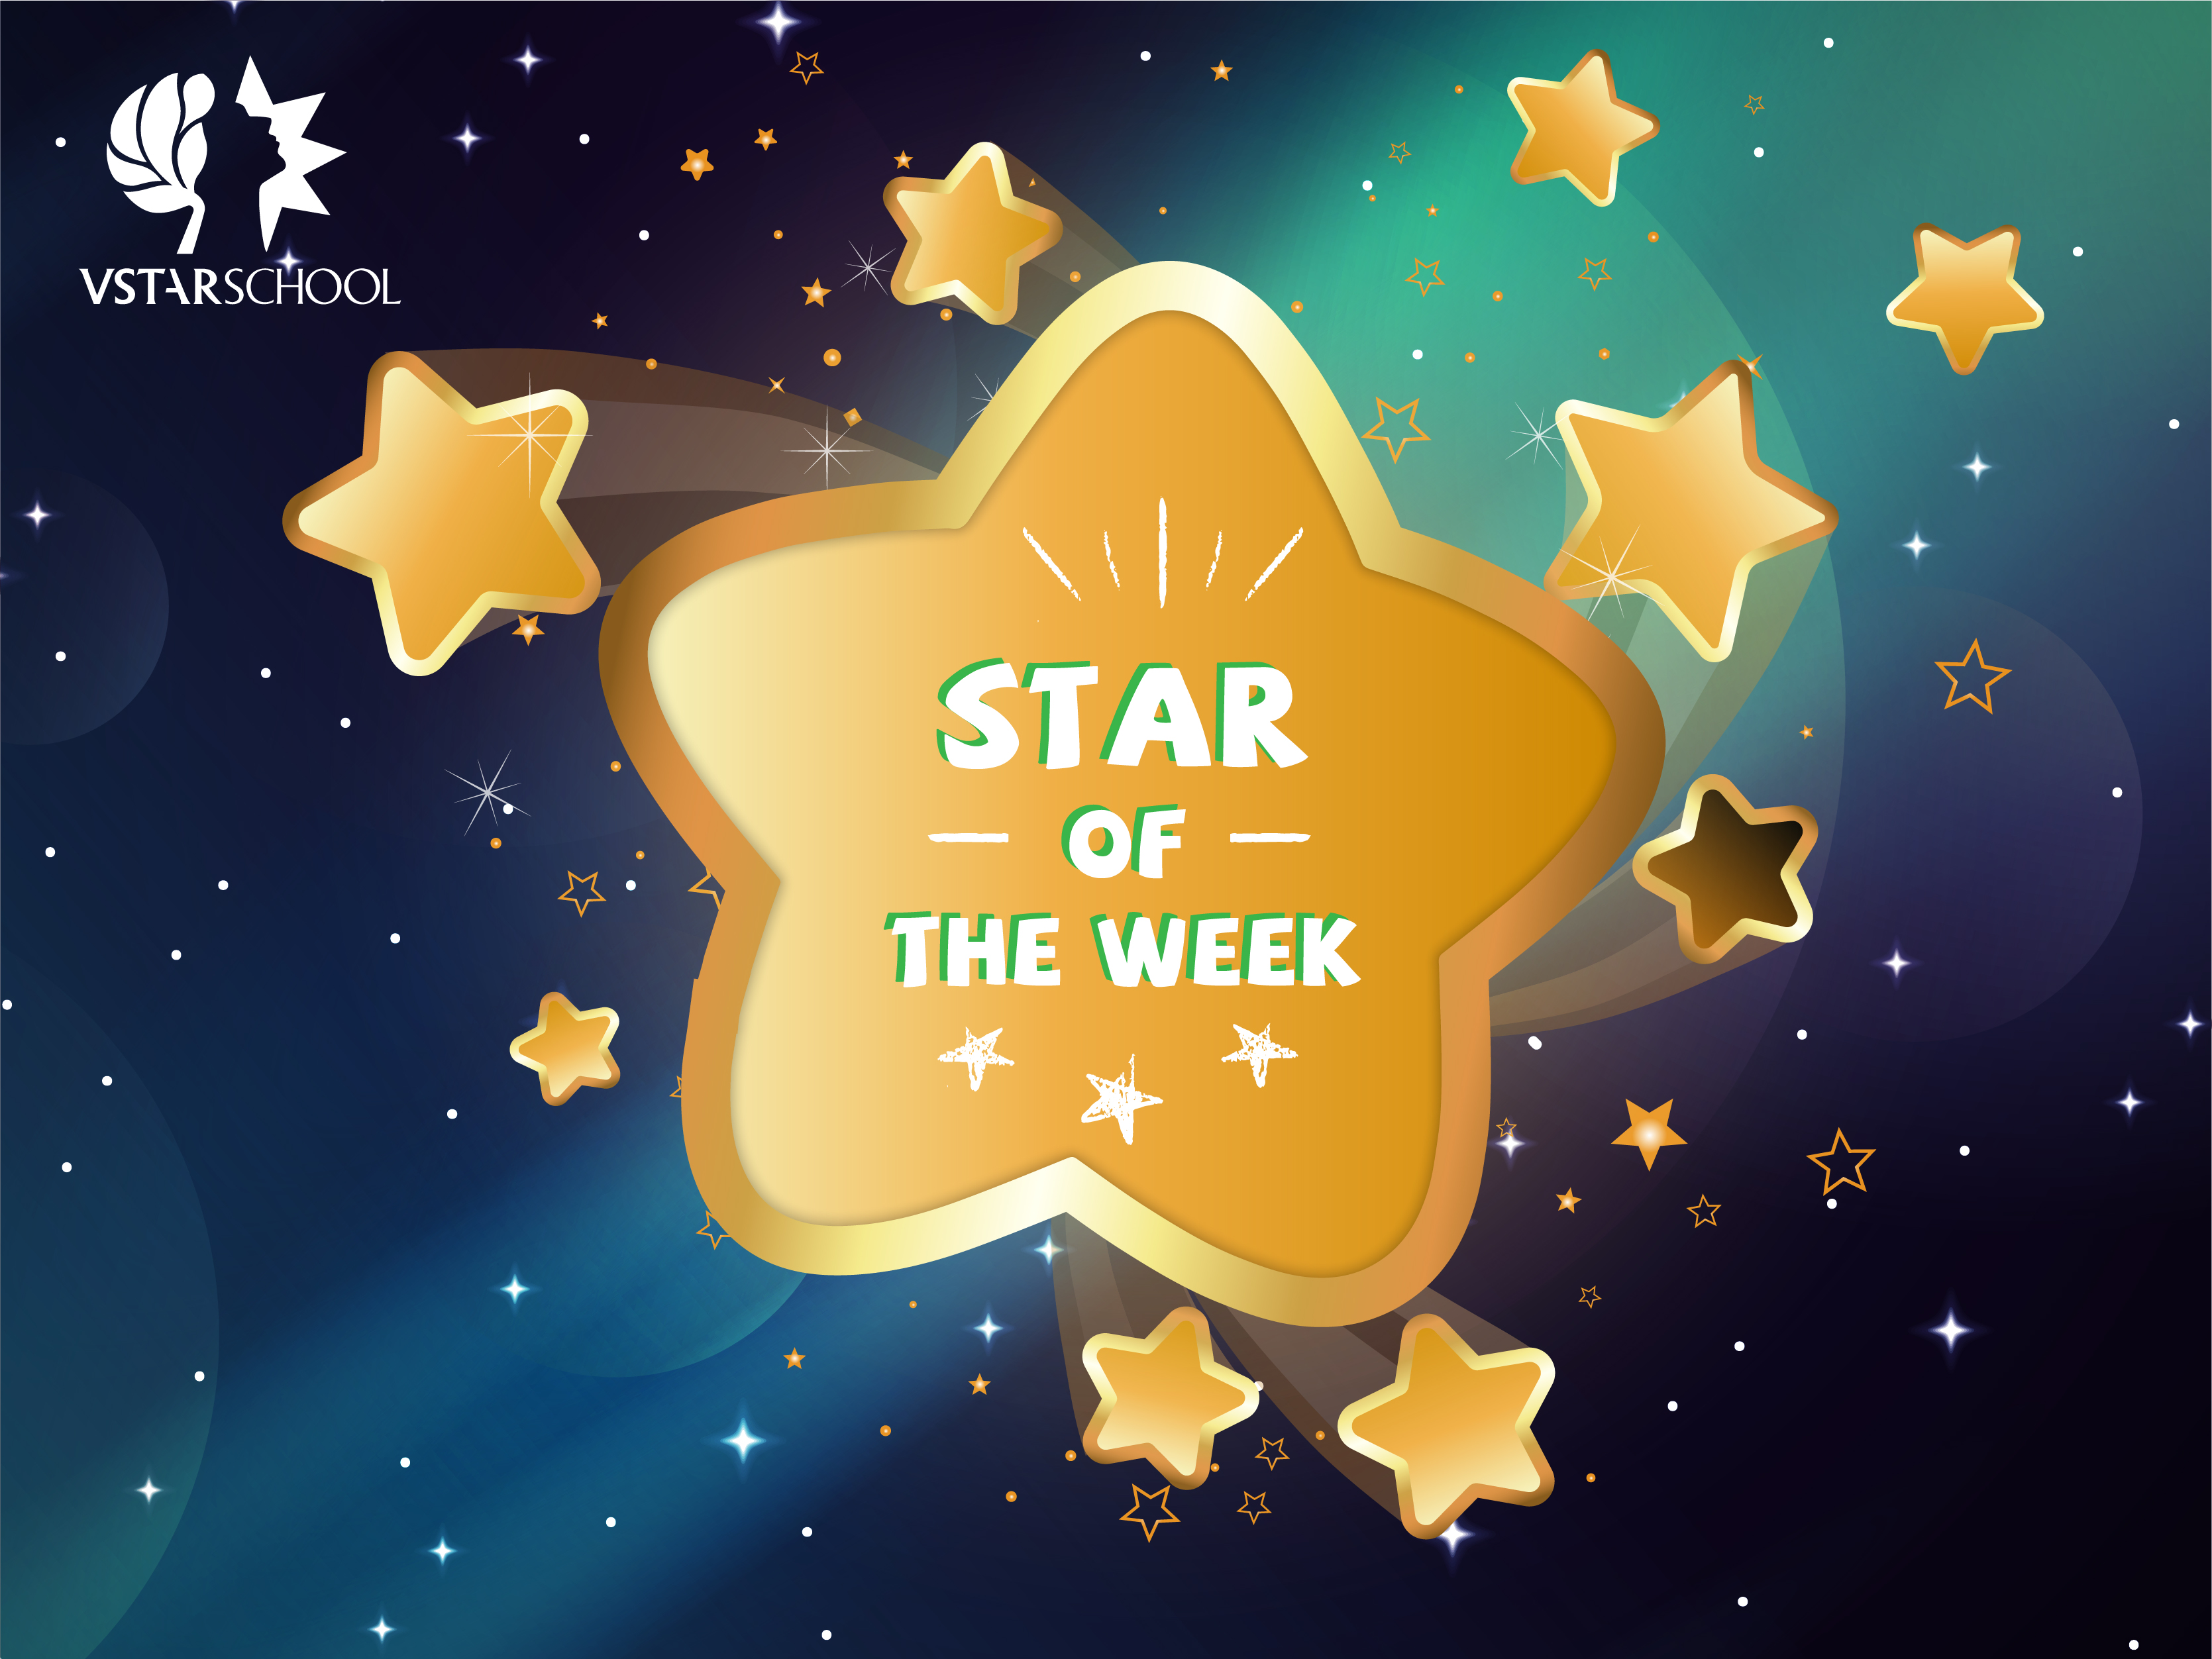 STAR OF THE WEEK TUẦN 1 - 11/2018